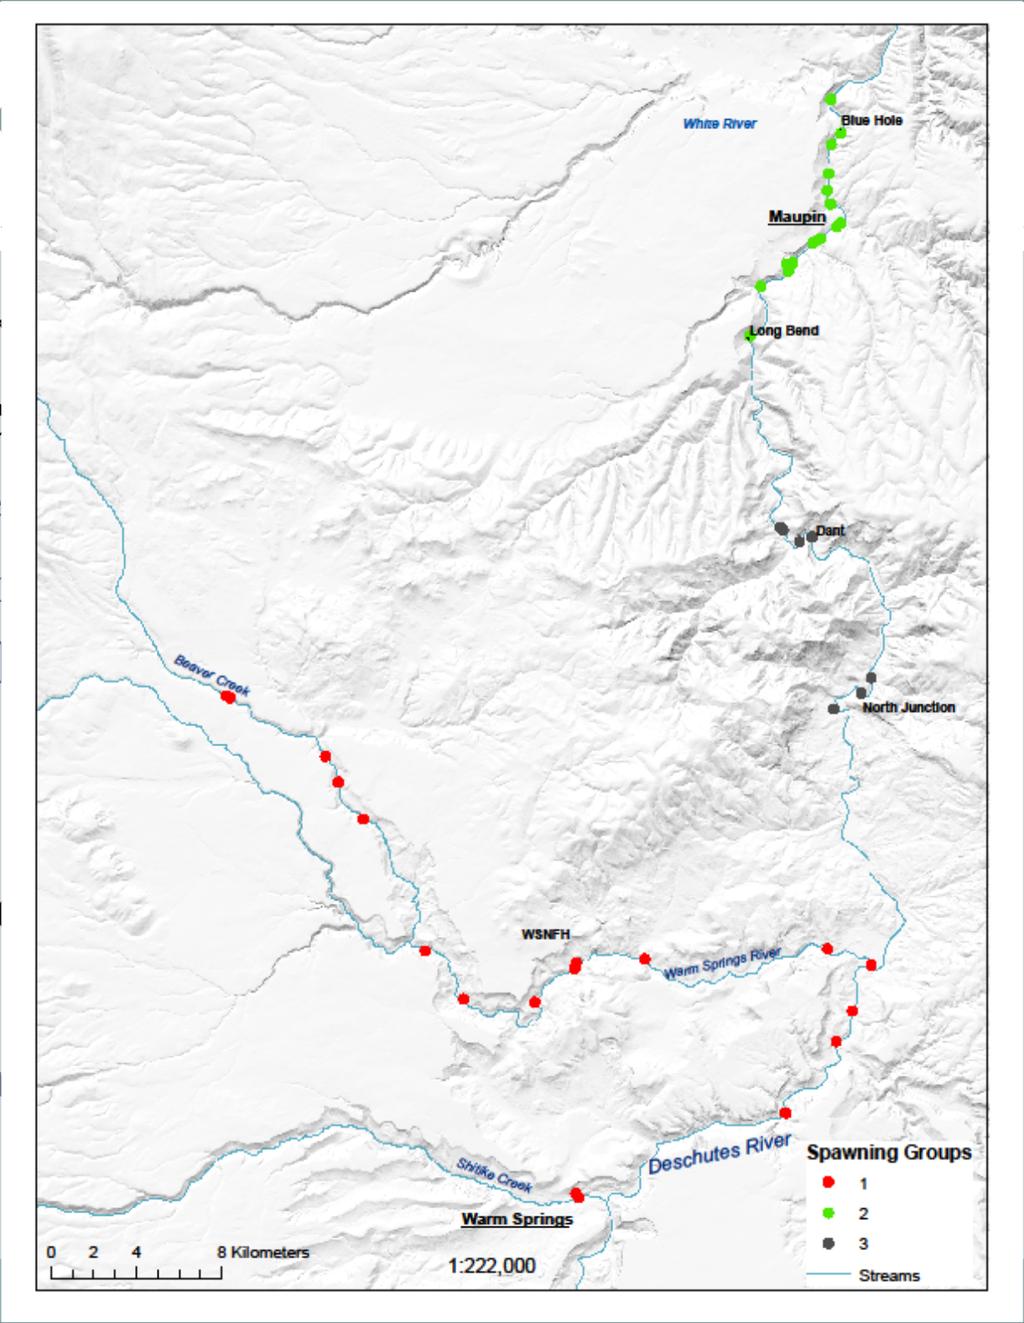 Overwinter and Spawning Locations Fall 2005-2008: overwinter locations of 35 of the 52 live, radio-tagged Pacific lampreys 74% (26) were in the Deschutes River 20% (7) were in the Warm Springs River